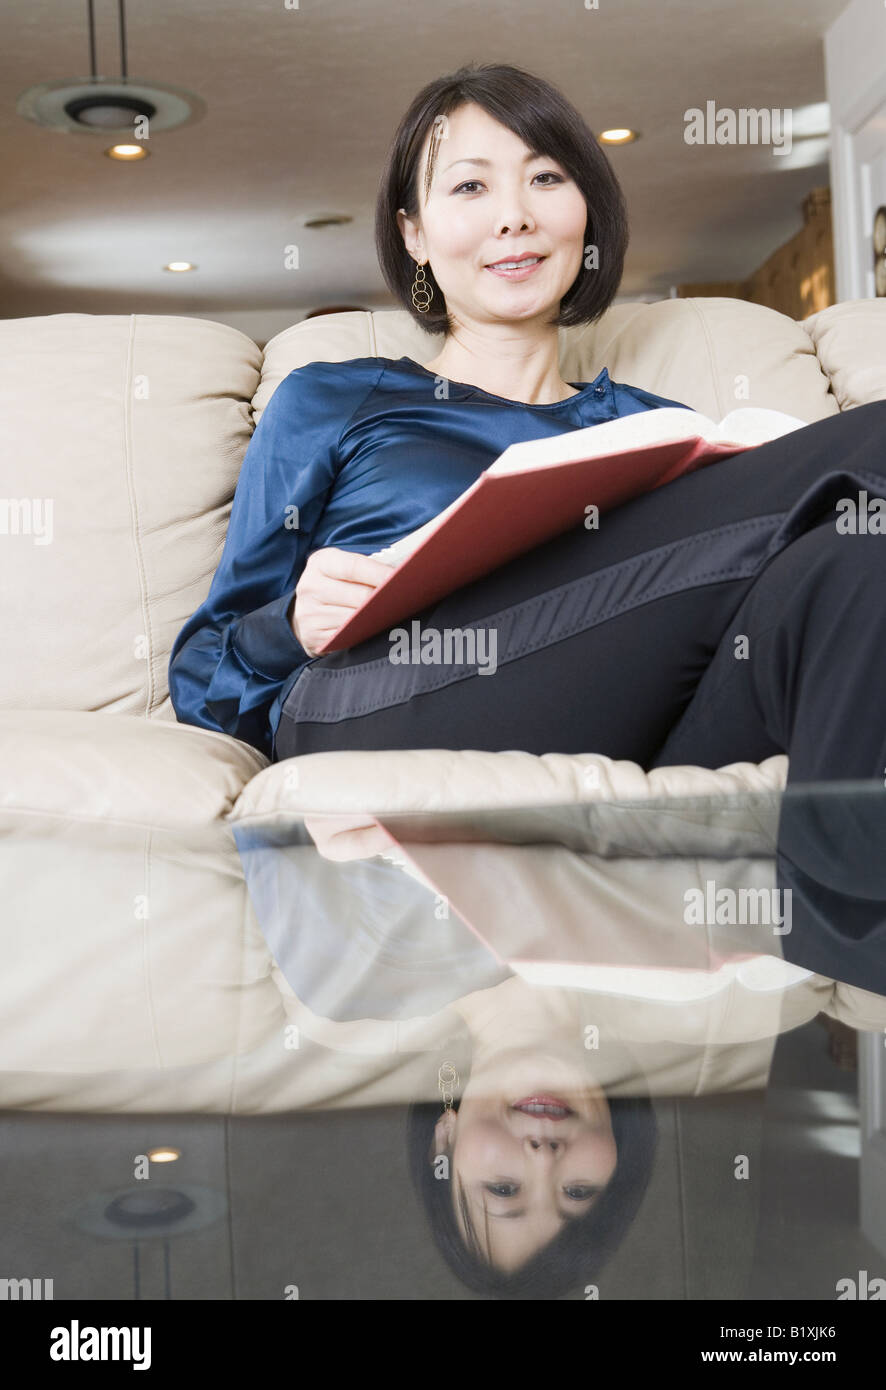 Portrait of a mid adult woman holding a document Stock Photo